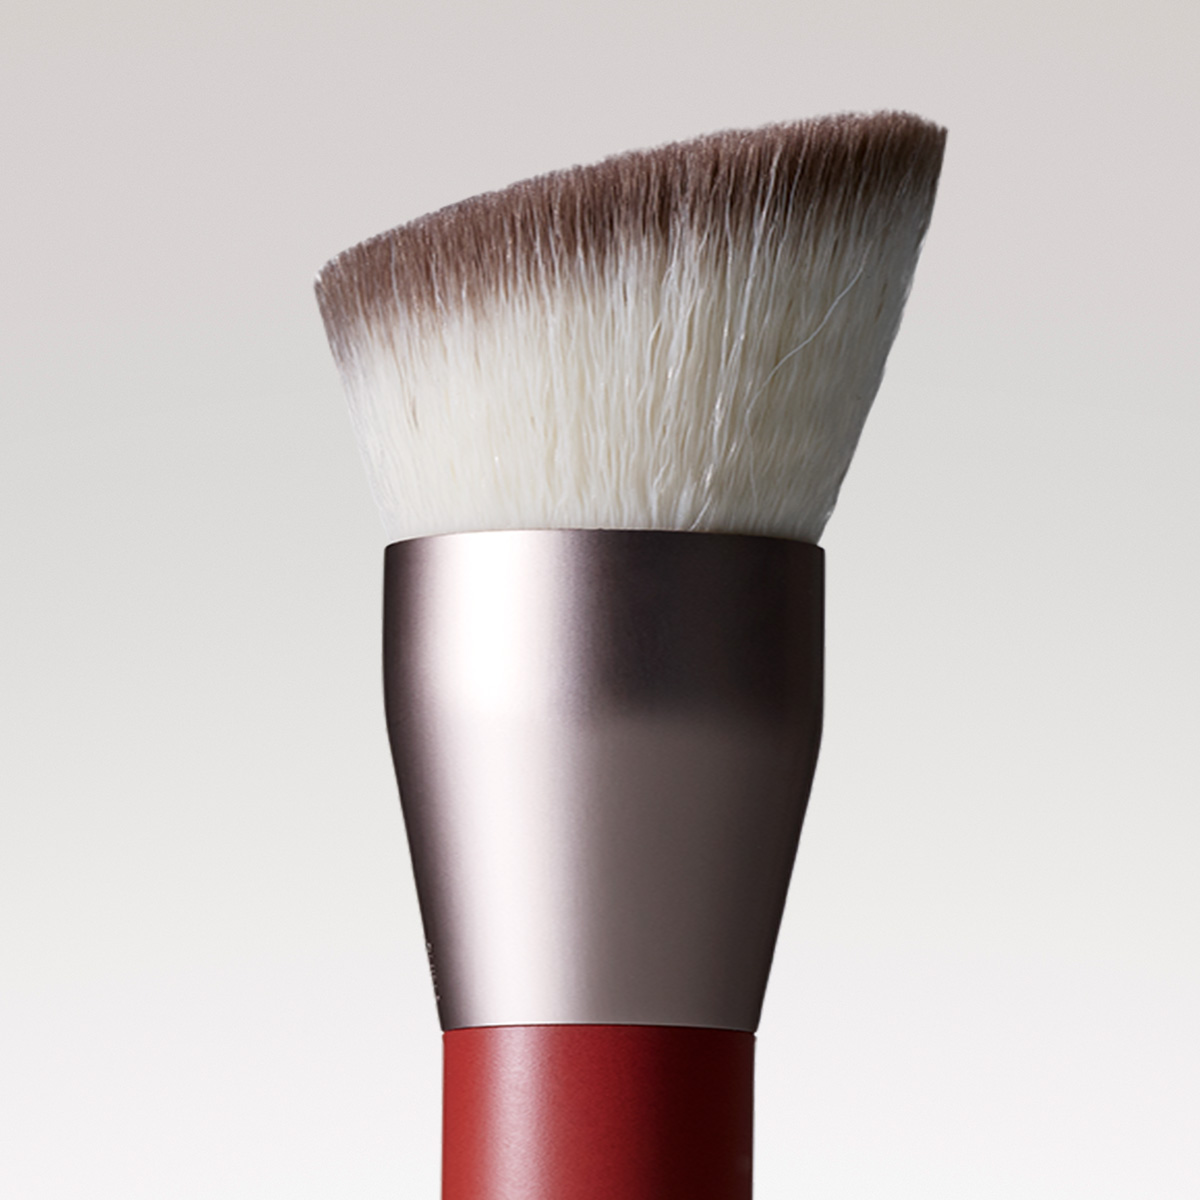 Zoomed in image of the Rose Inc Number 3 Foundation Brush's bristles